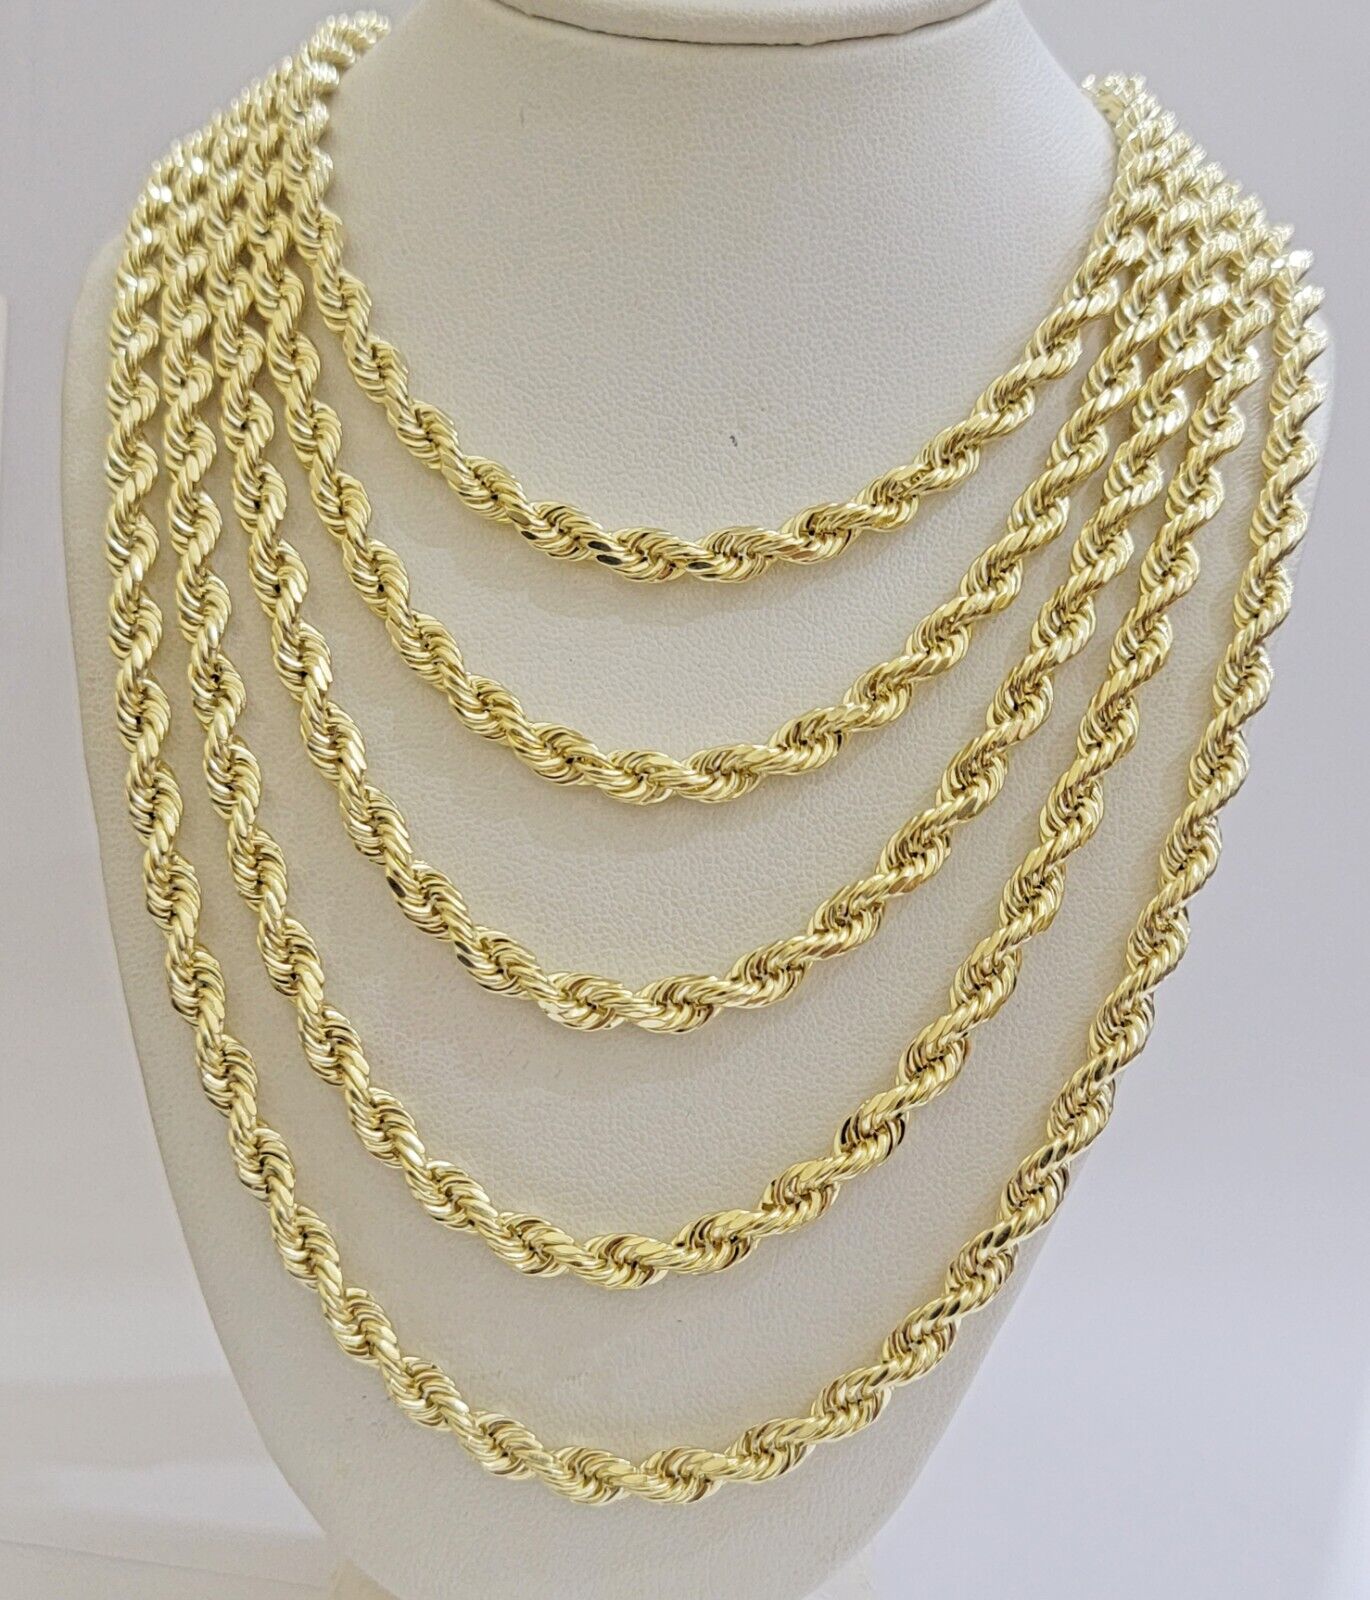 14k Gold Rope Chain Necklace 5mm 18-26 Inch Diamond Cut Men Women REAL 14KT GOLD